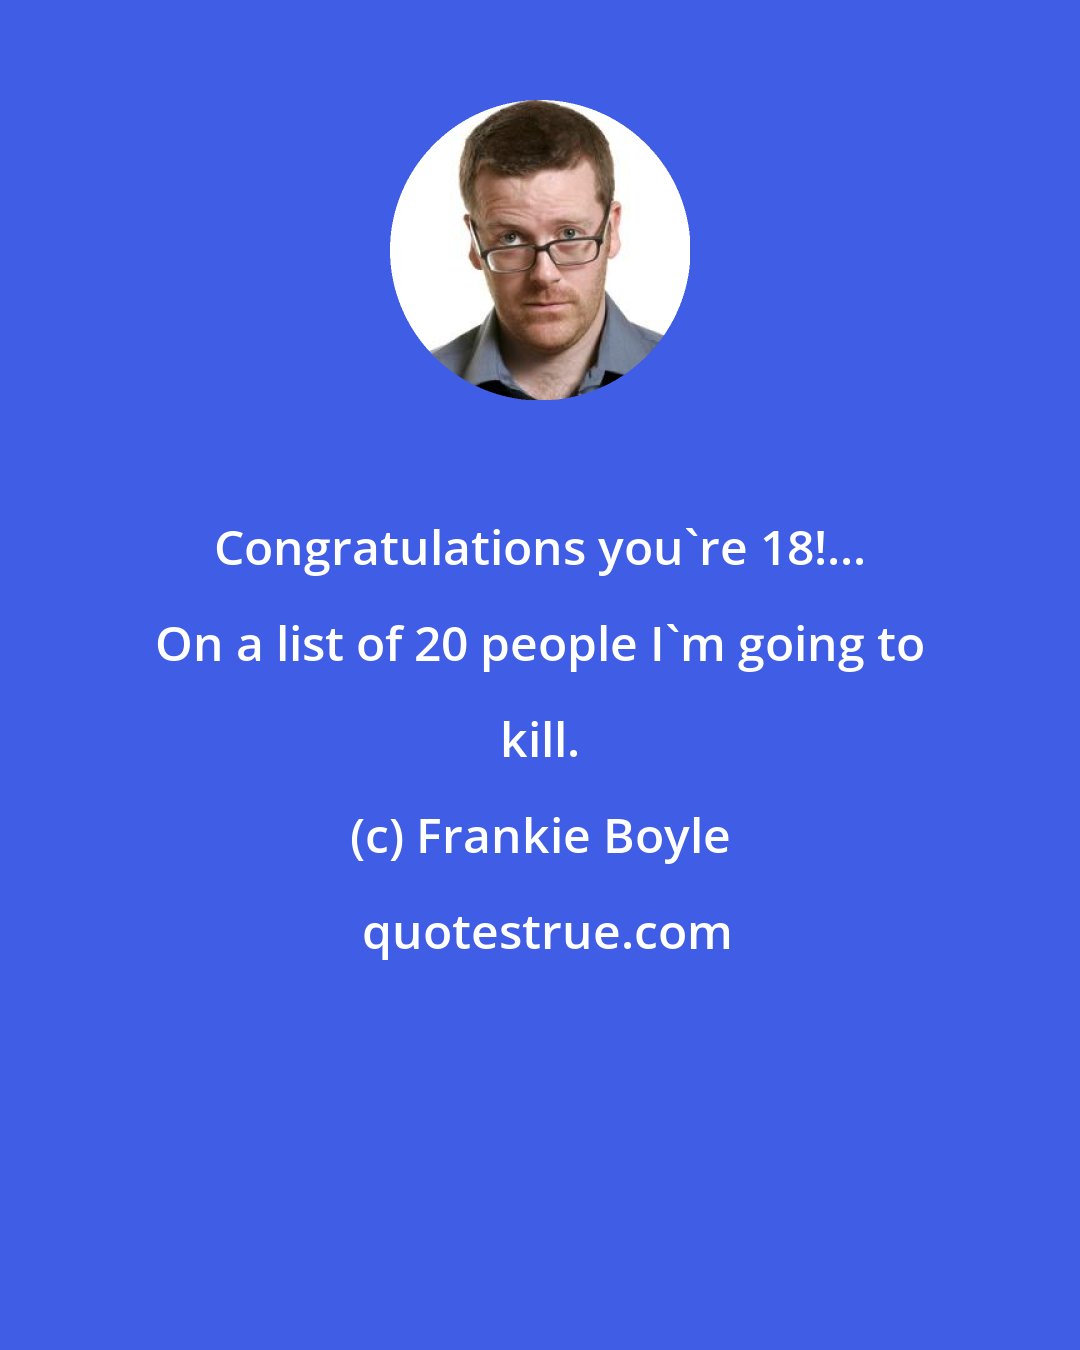 Frankie Boyle: Congratulations you're 18!... On a list of 20 people I'm going to kill.